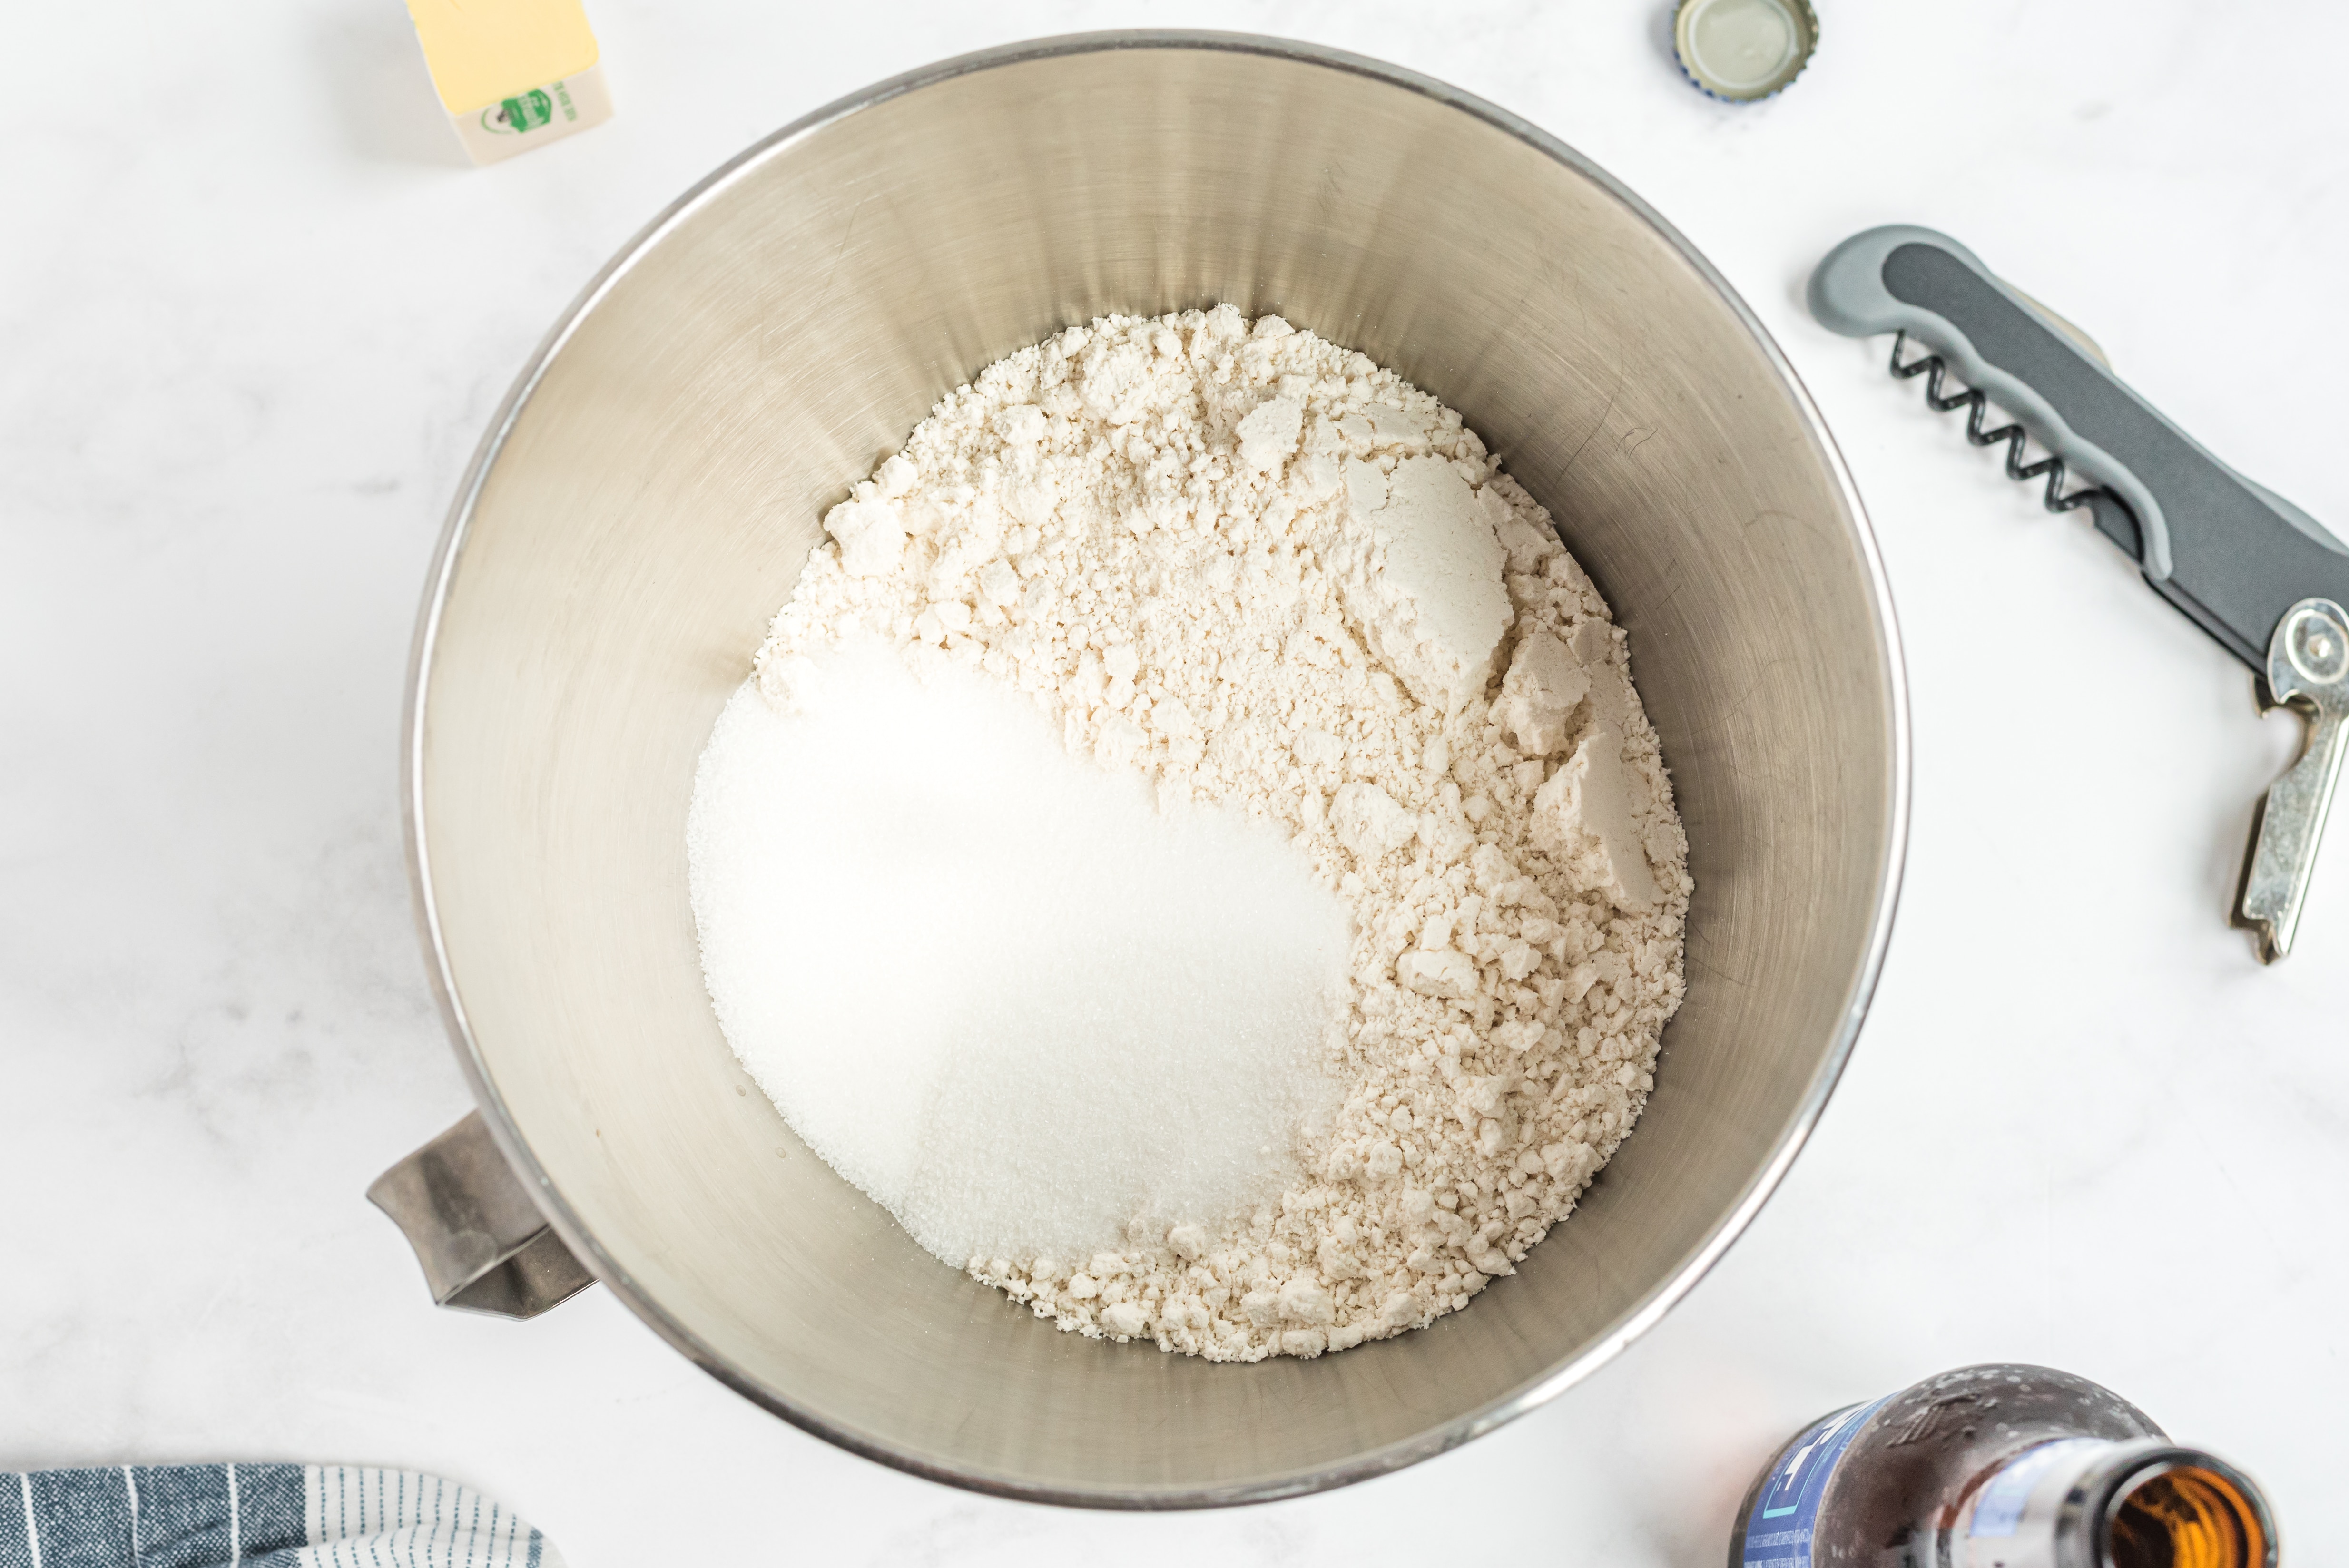 Flour and sugar measured in a metal mixing bowl, baking preparation underway.